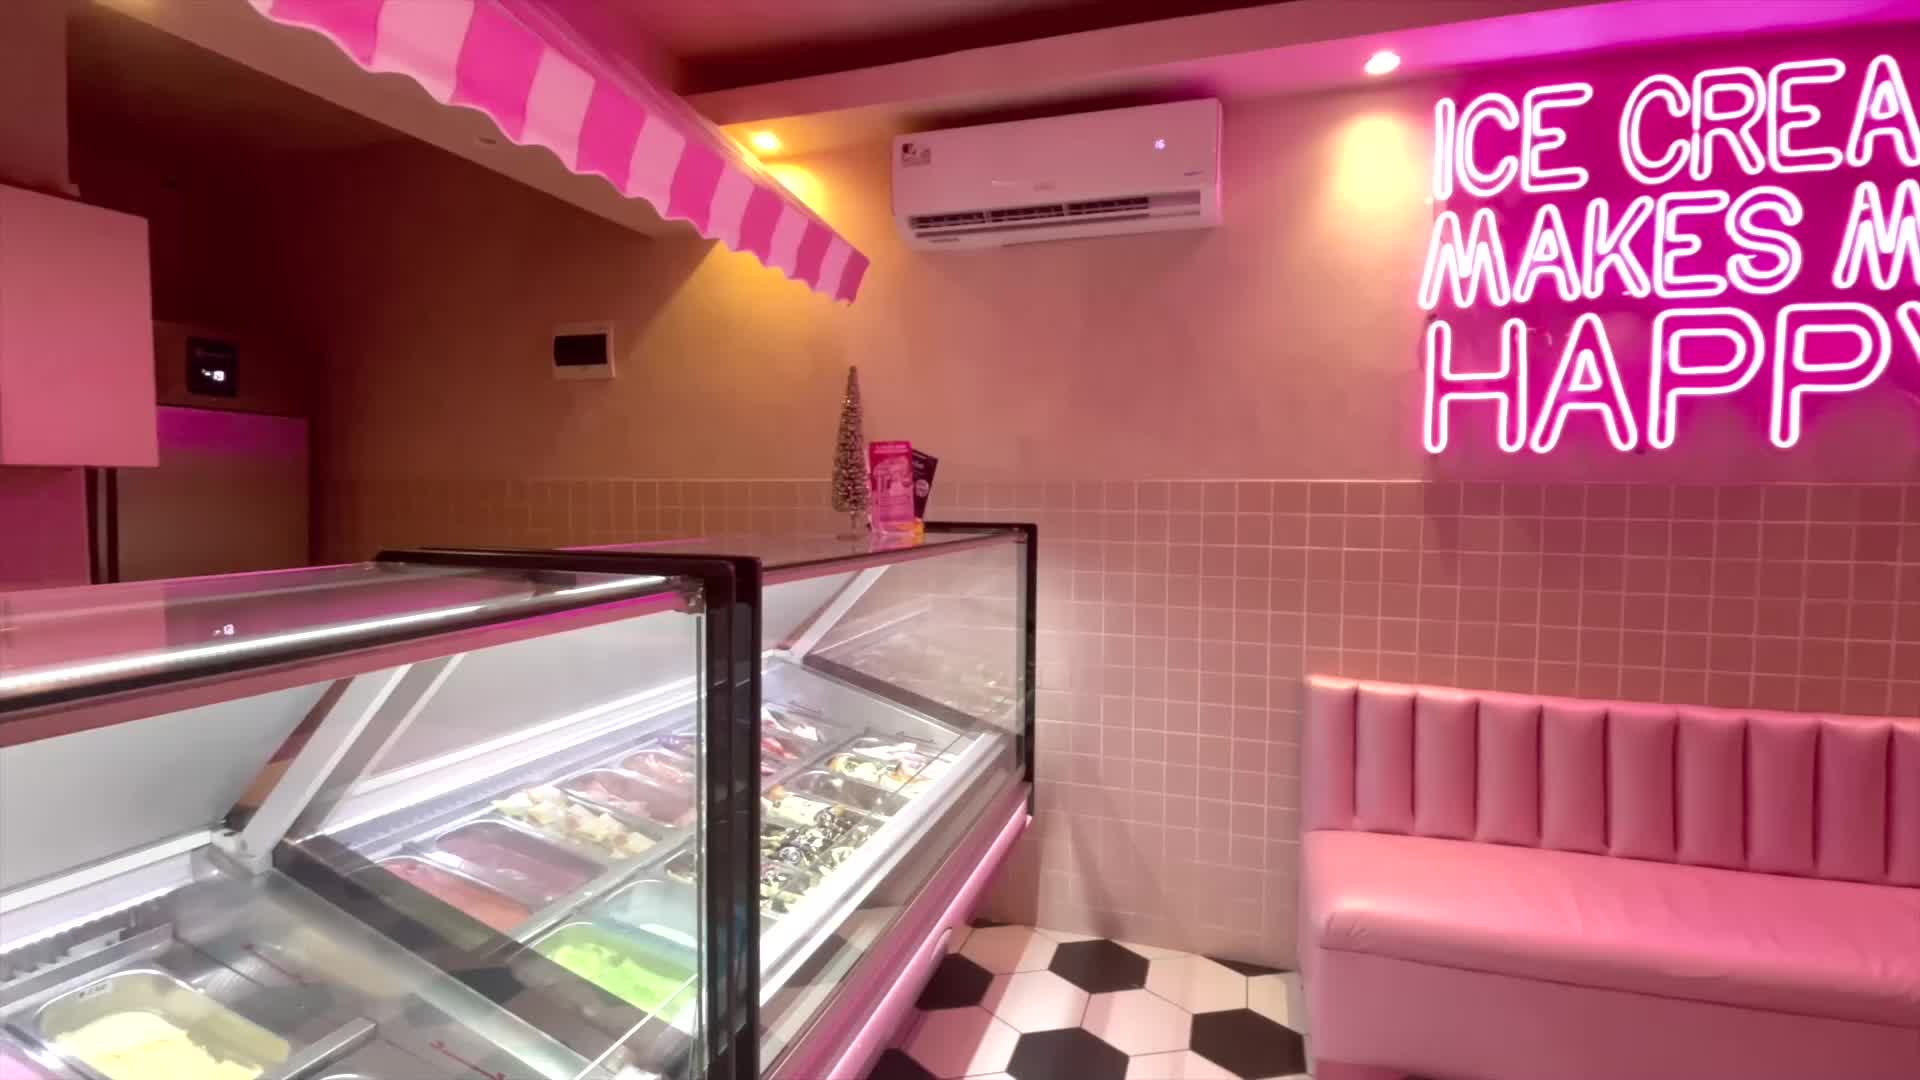 A promotional video introducing the Heladeria Yummy at Playa Palmera Beach Resort, and the ice cream dessert offerings. 